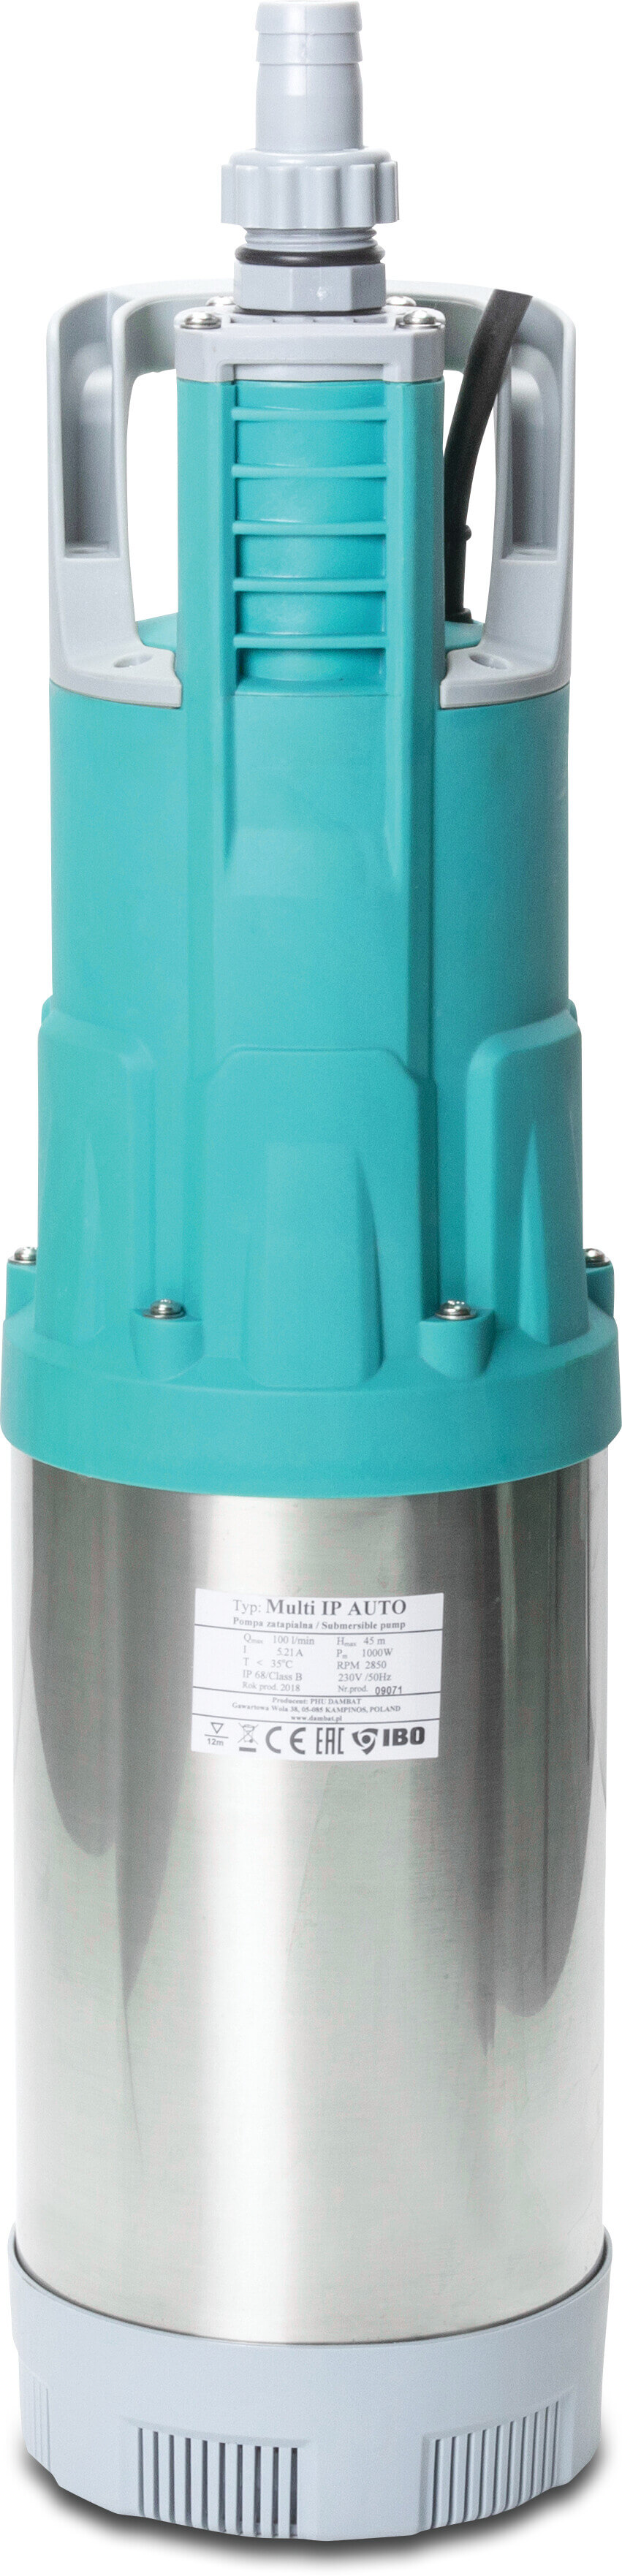 Submersible pump 1" x 1 1/2" x 3/4" hose tail x male thread x hose tail 5,2A 230VAC blue AUTO type Multi IP Multi stage